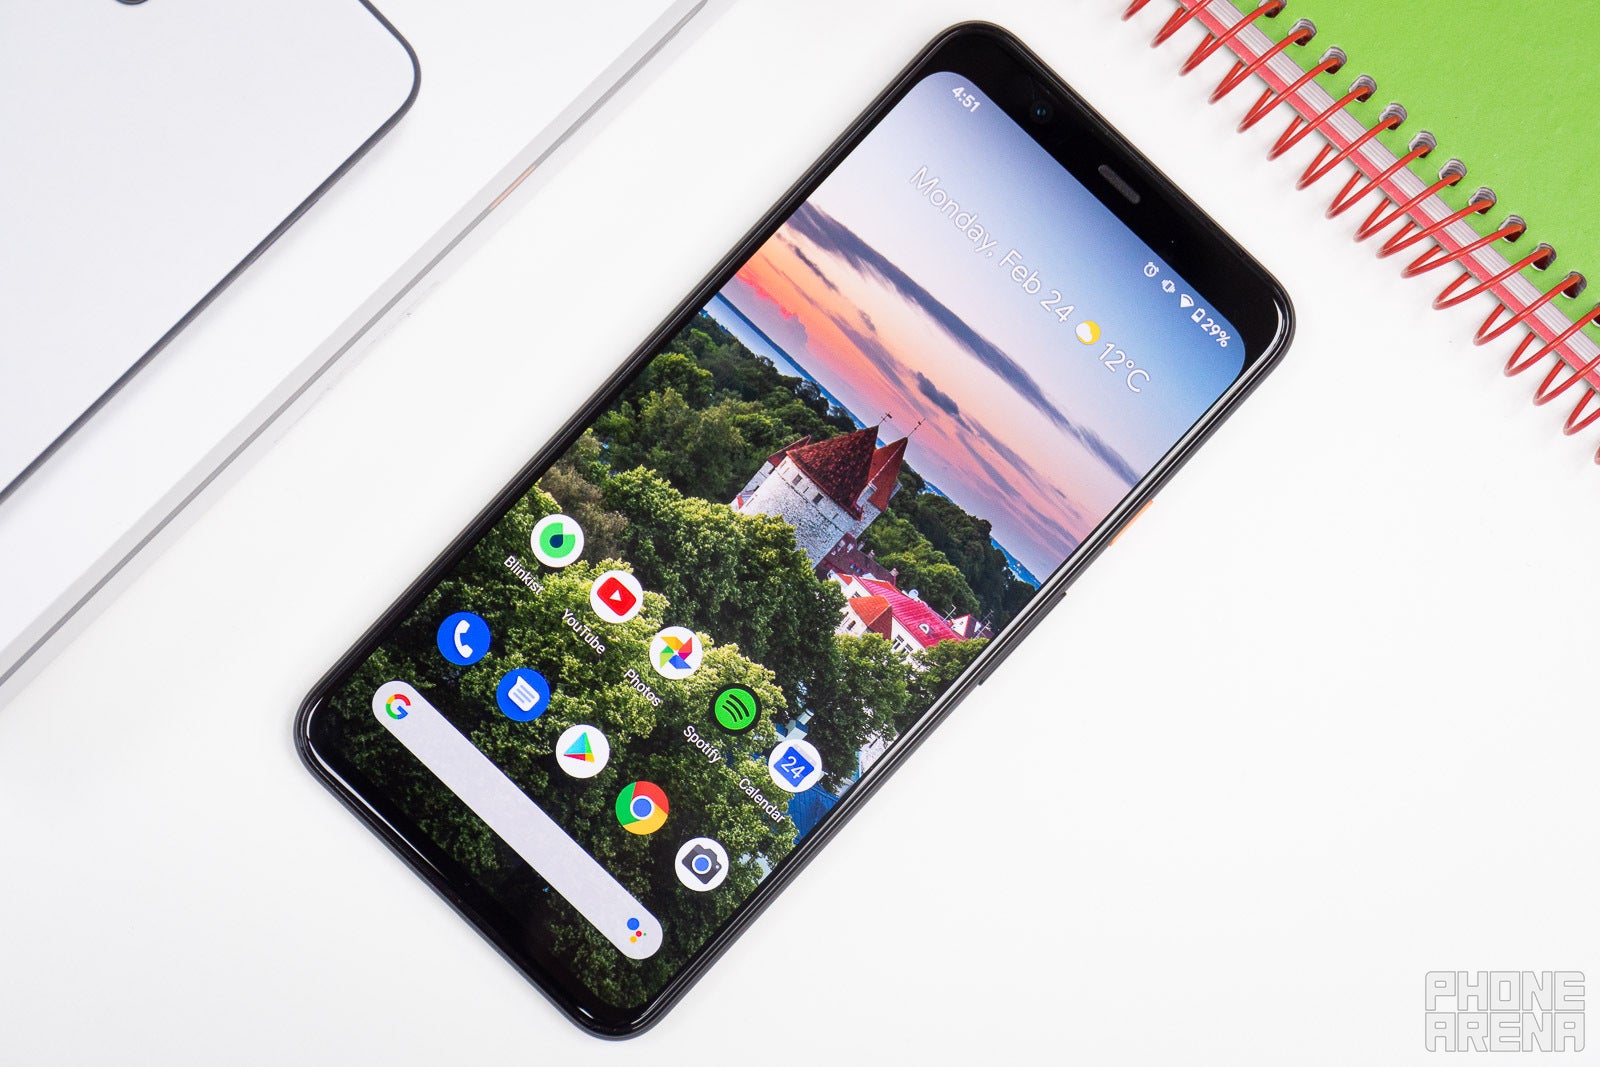 The display on the Google Pixel 4 XL looks gorgeous - Google Pixel 4 XL review 4 months later: is it worth getting one in 2020?